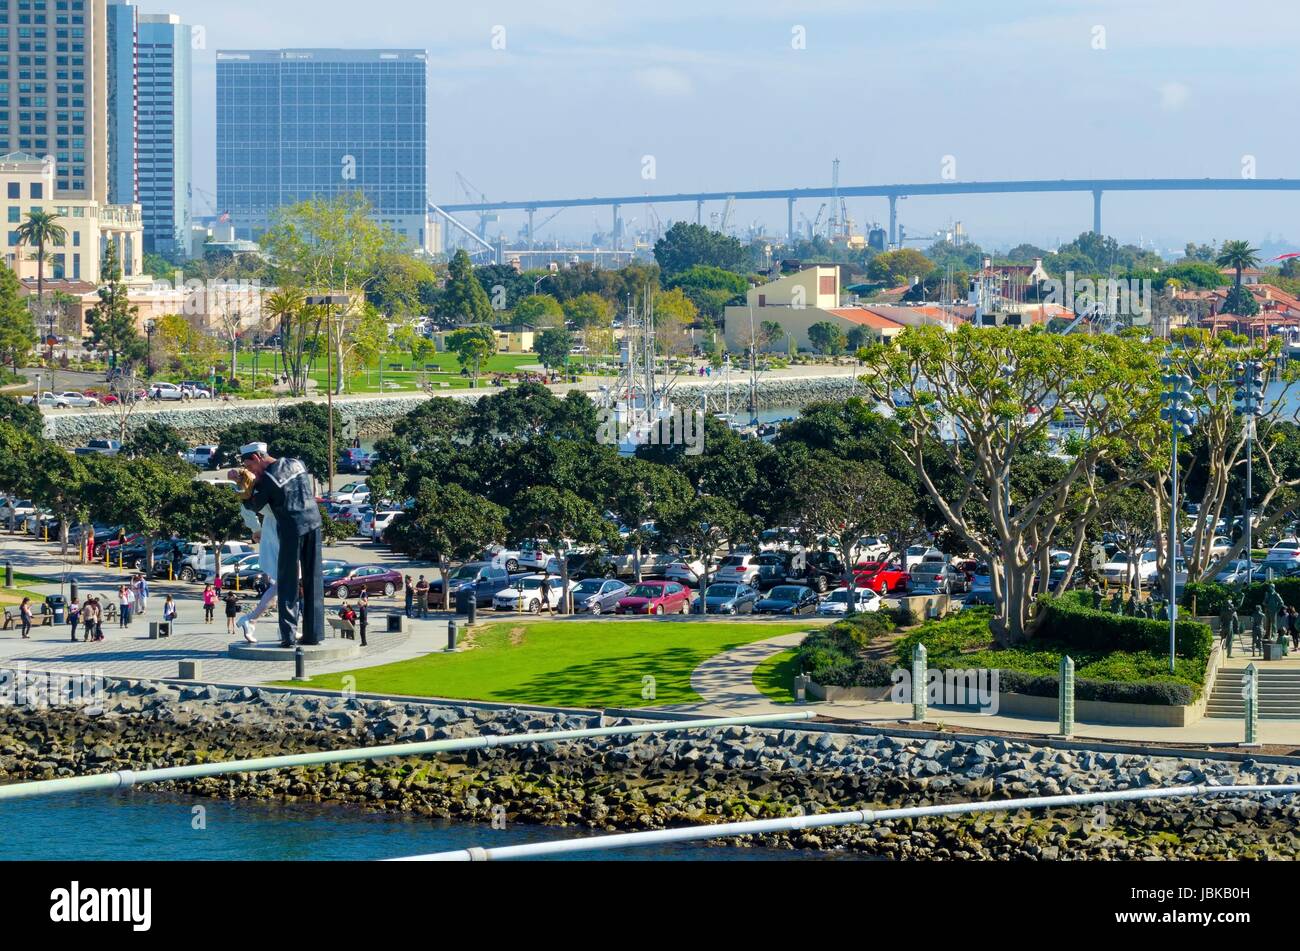 A view of the Unconditional surrender statue in Downtown San Diego marina in southern California in the United States of America. Some of the local arcitecture, commercial buildings and the coronado bridge in the city. Stock Photo